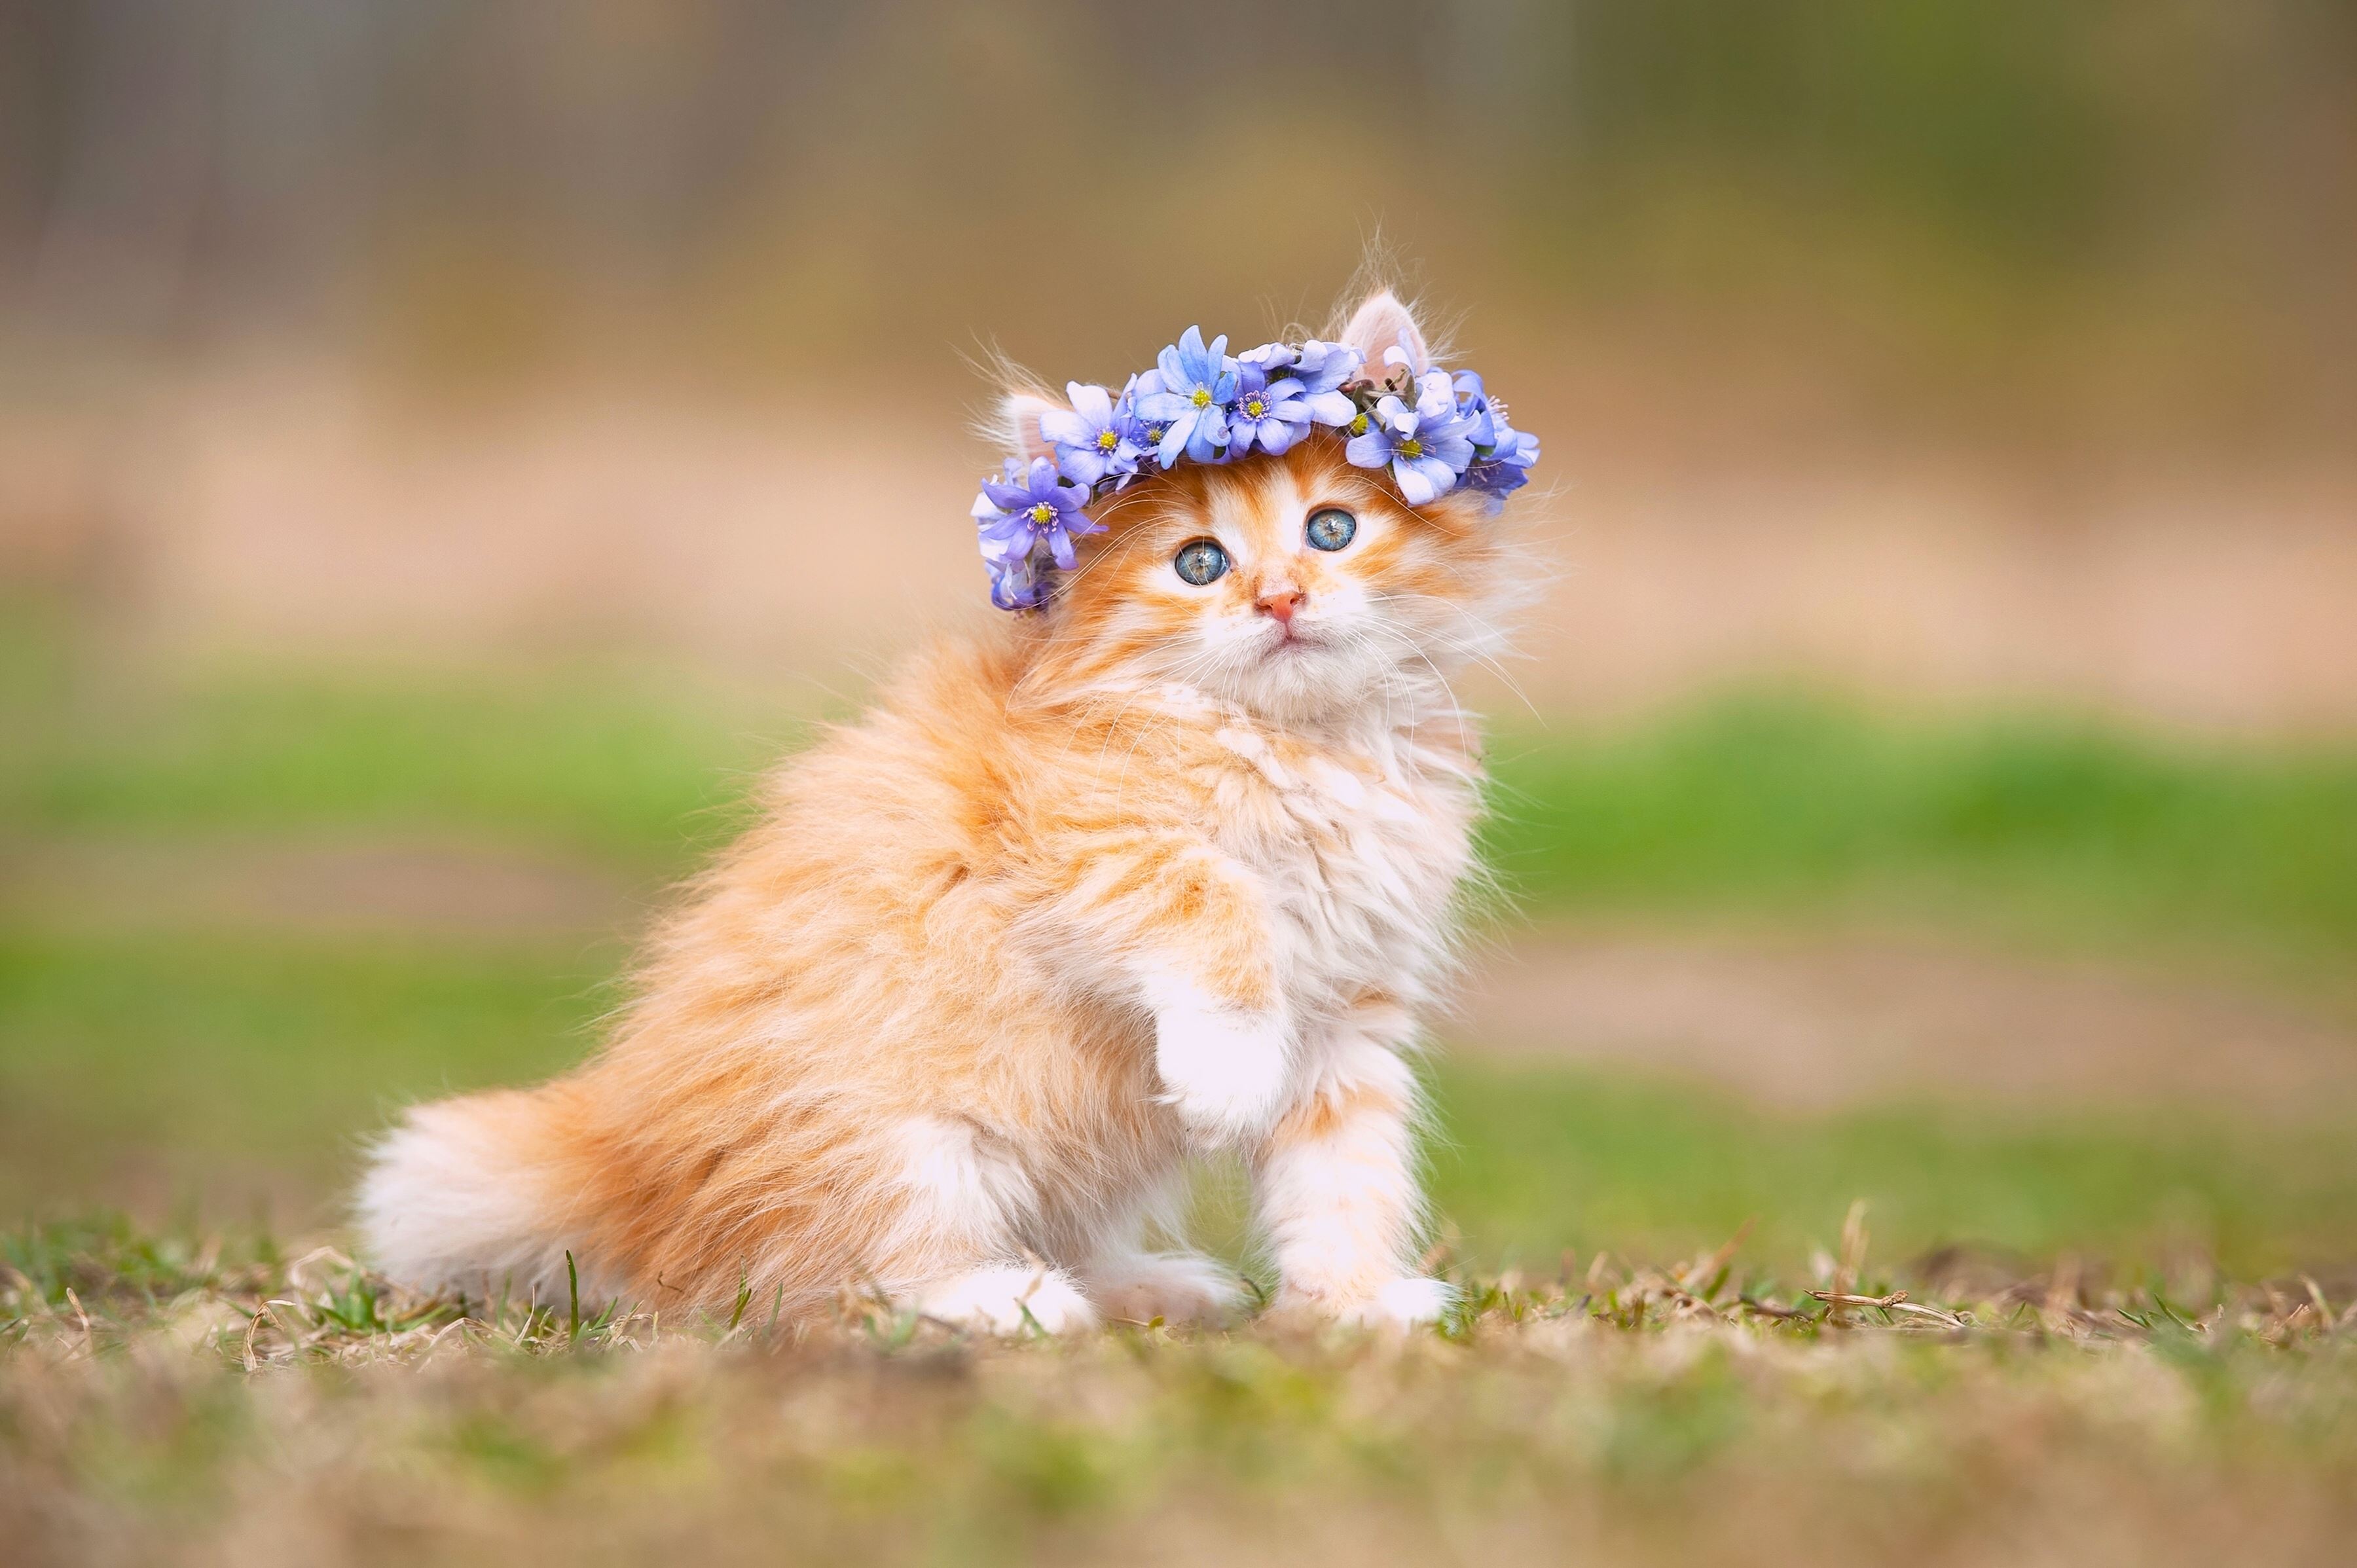 Red fluffy kitten with a wreath of flowers on his head wallpapers and